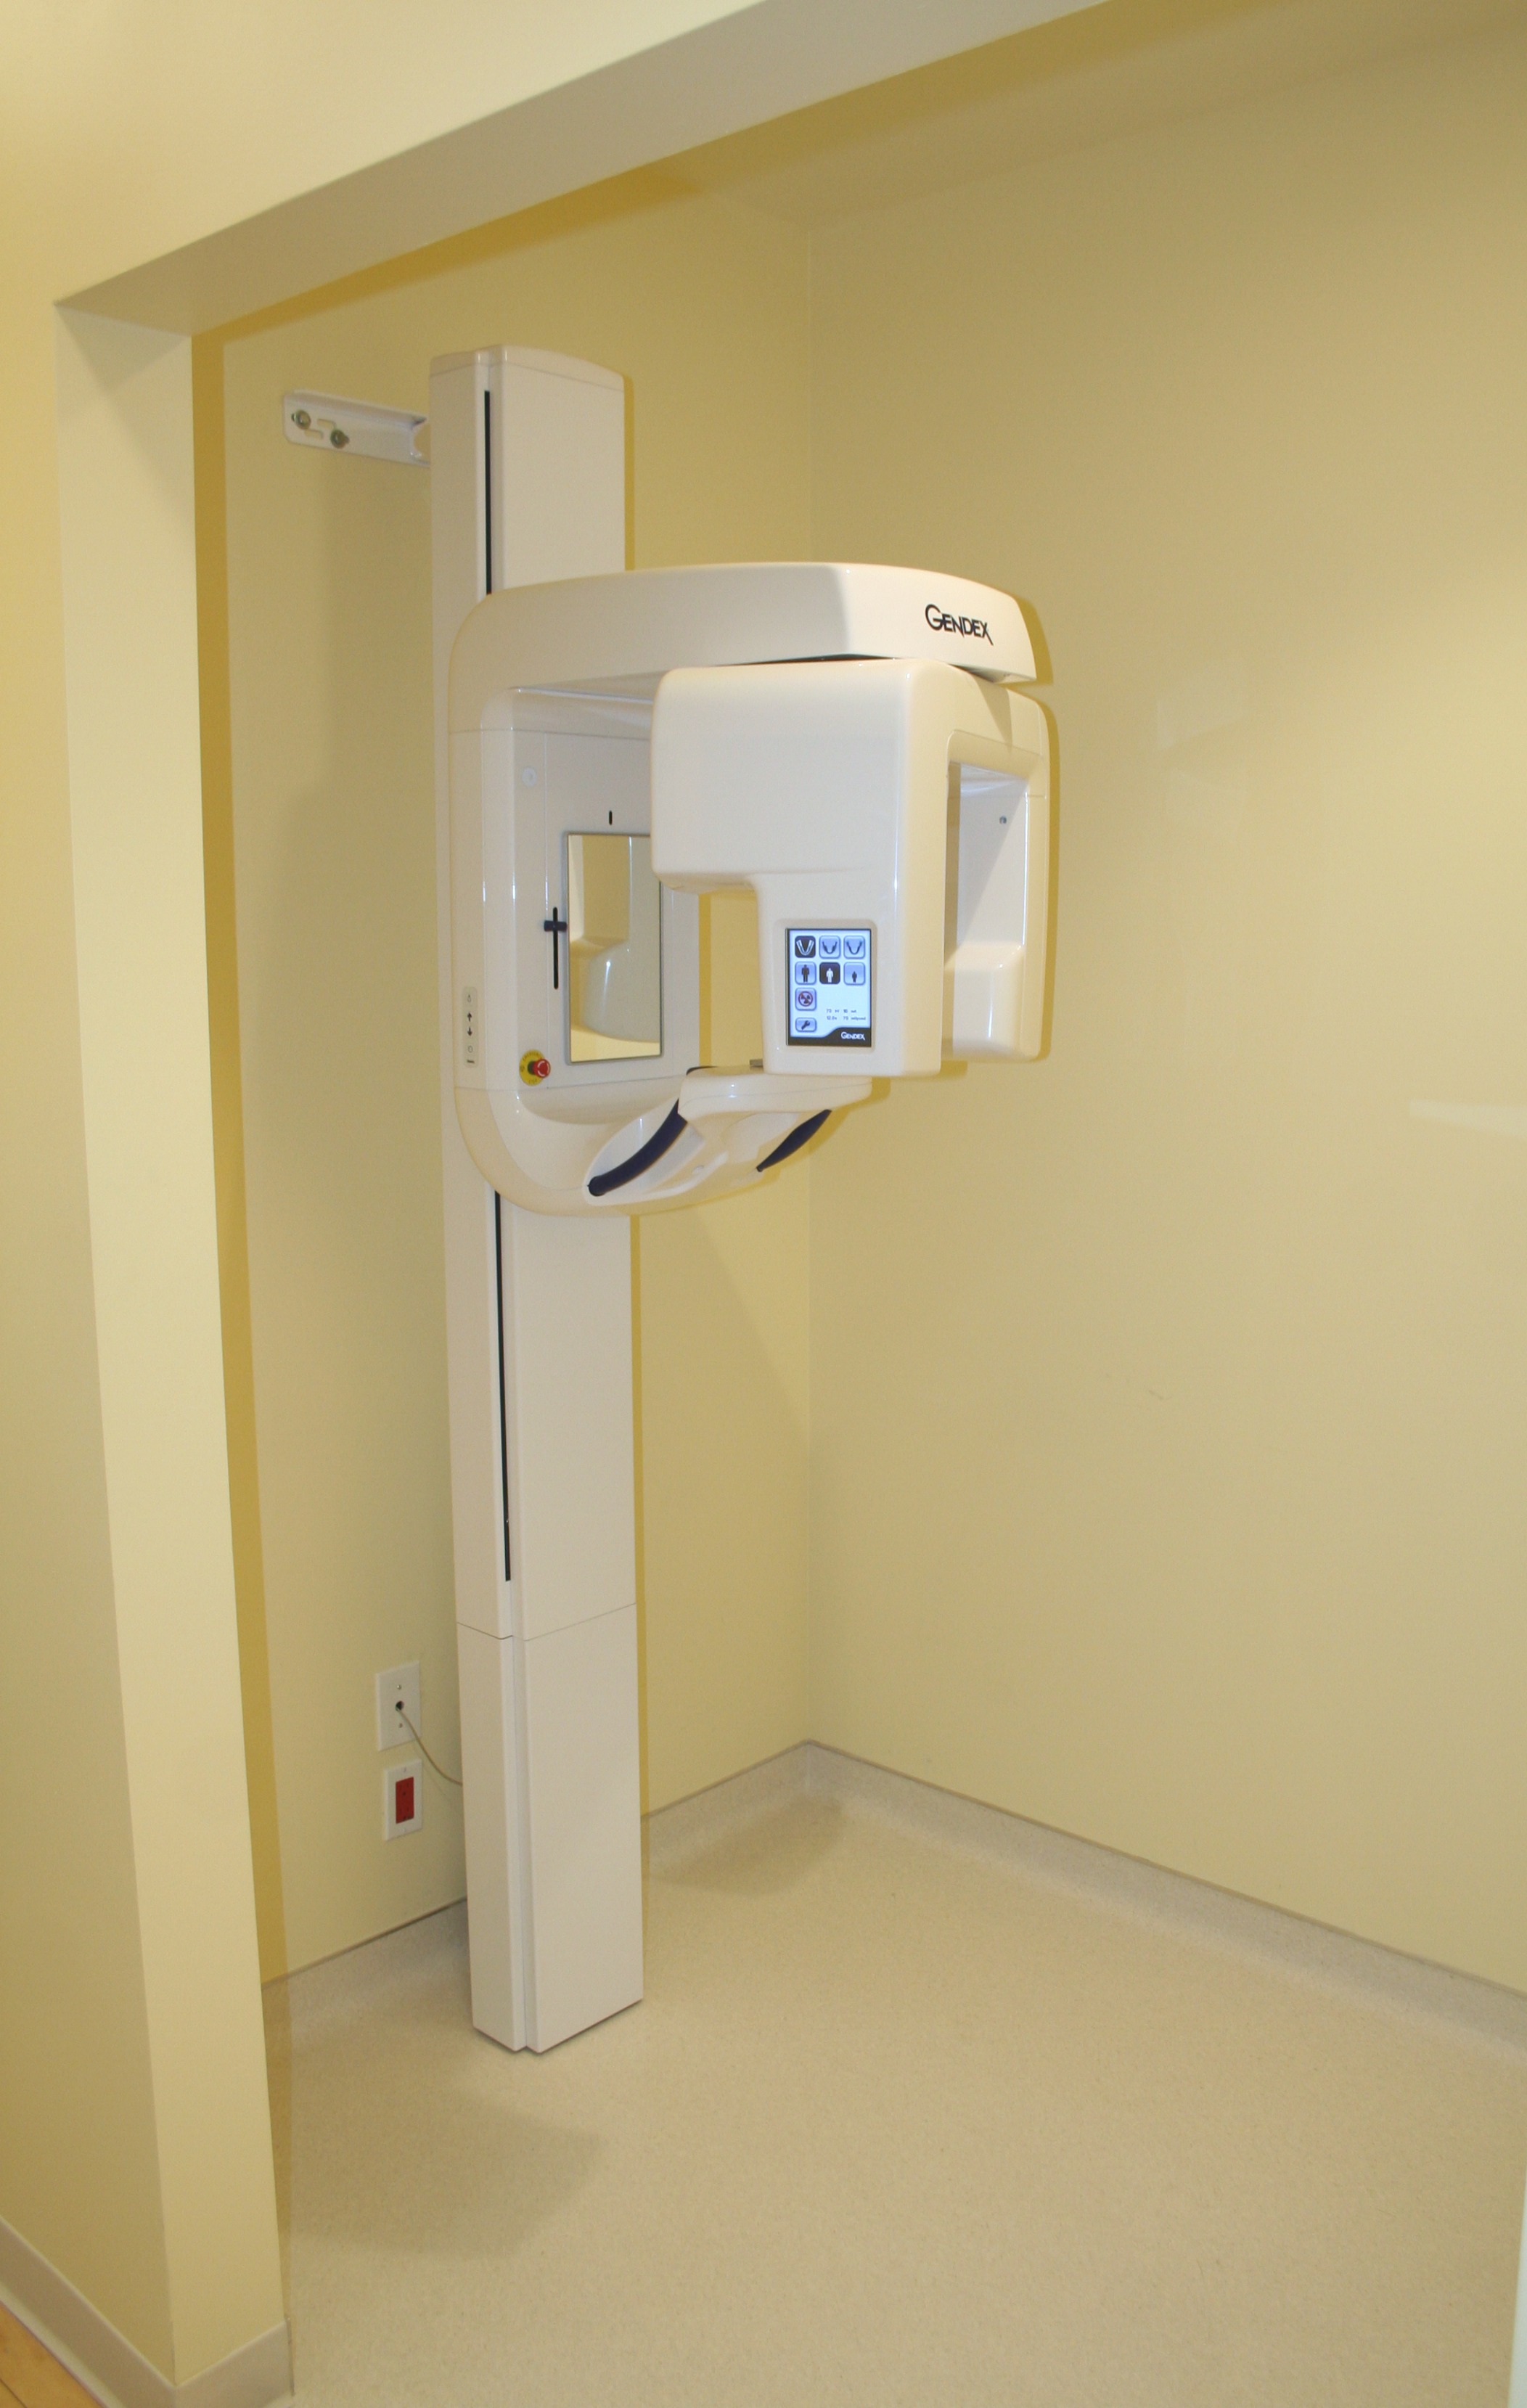 General Contractor Builds Los Angeles Medical Dental Facility Construction x-ray radiology room